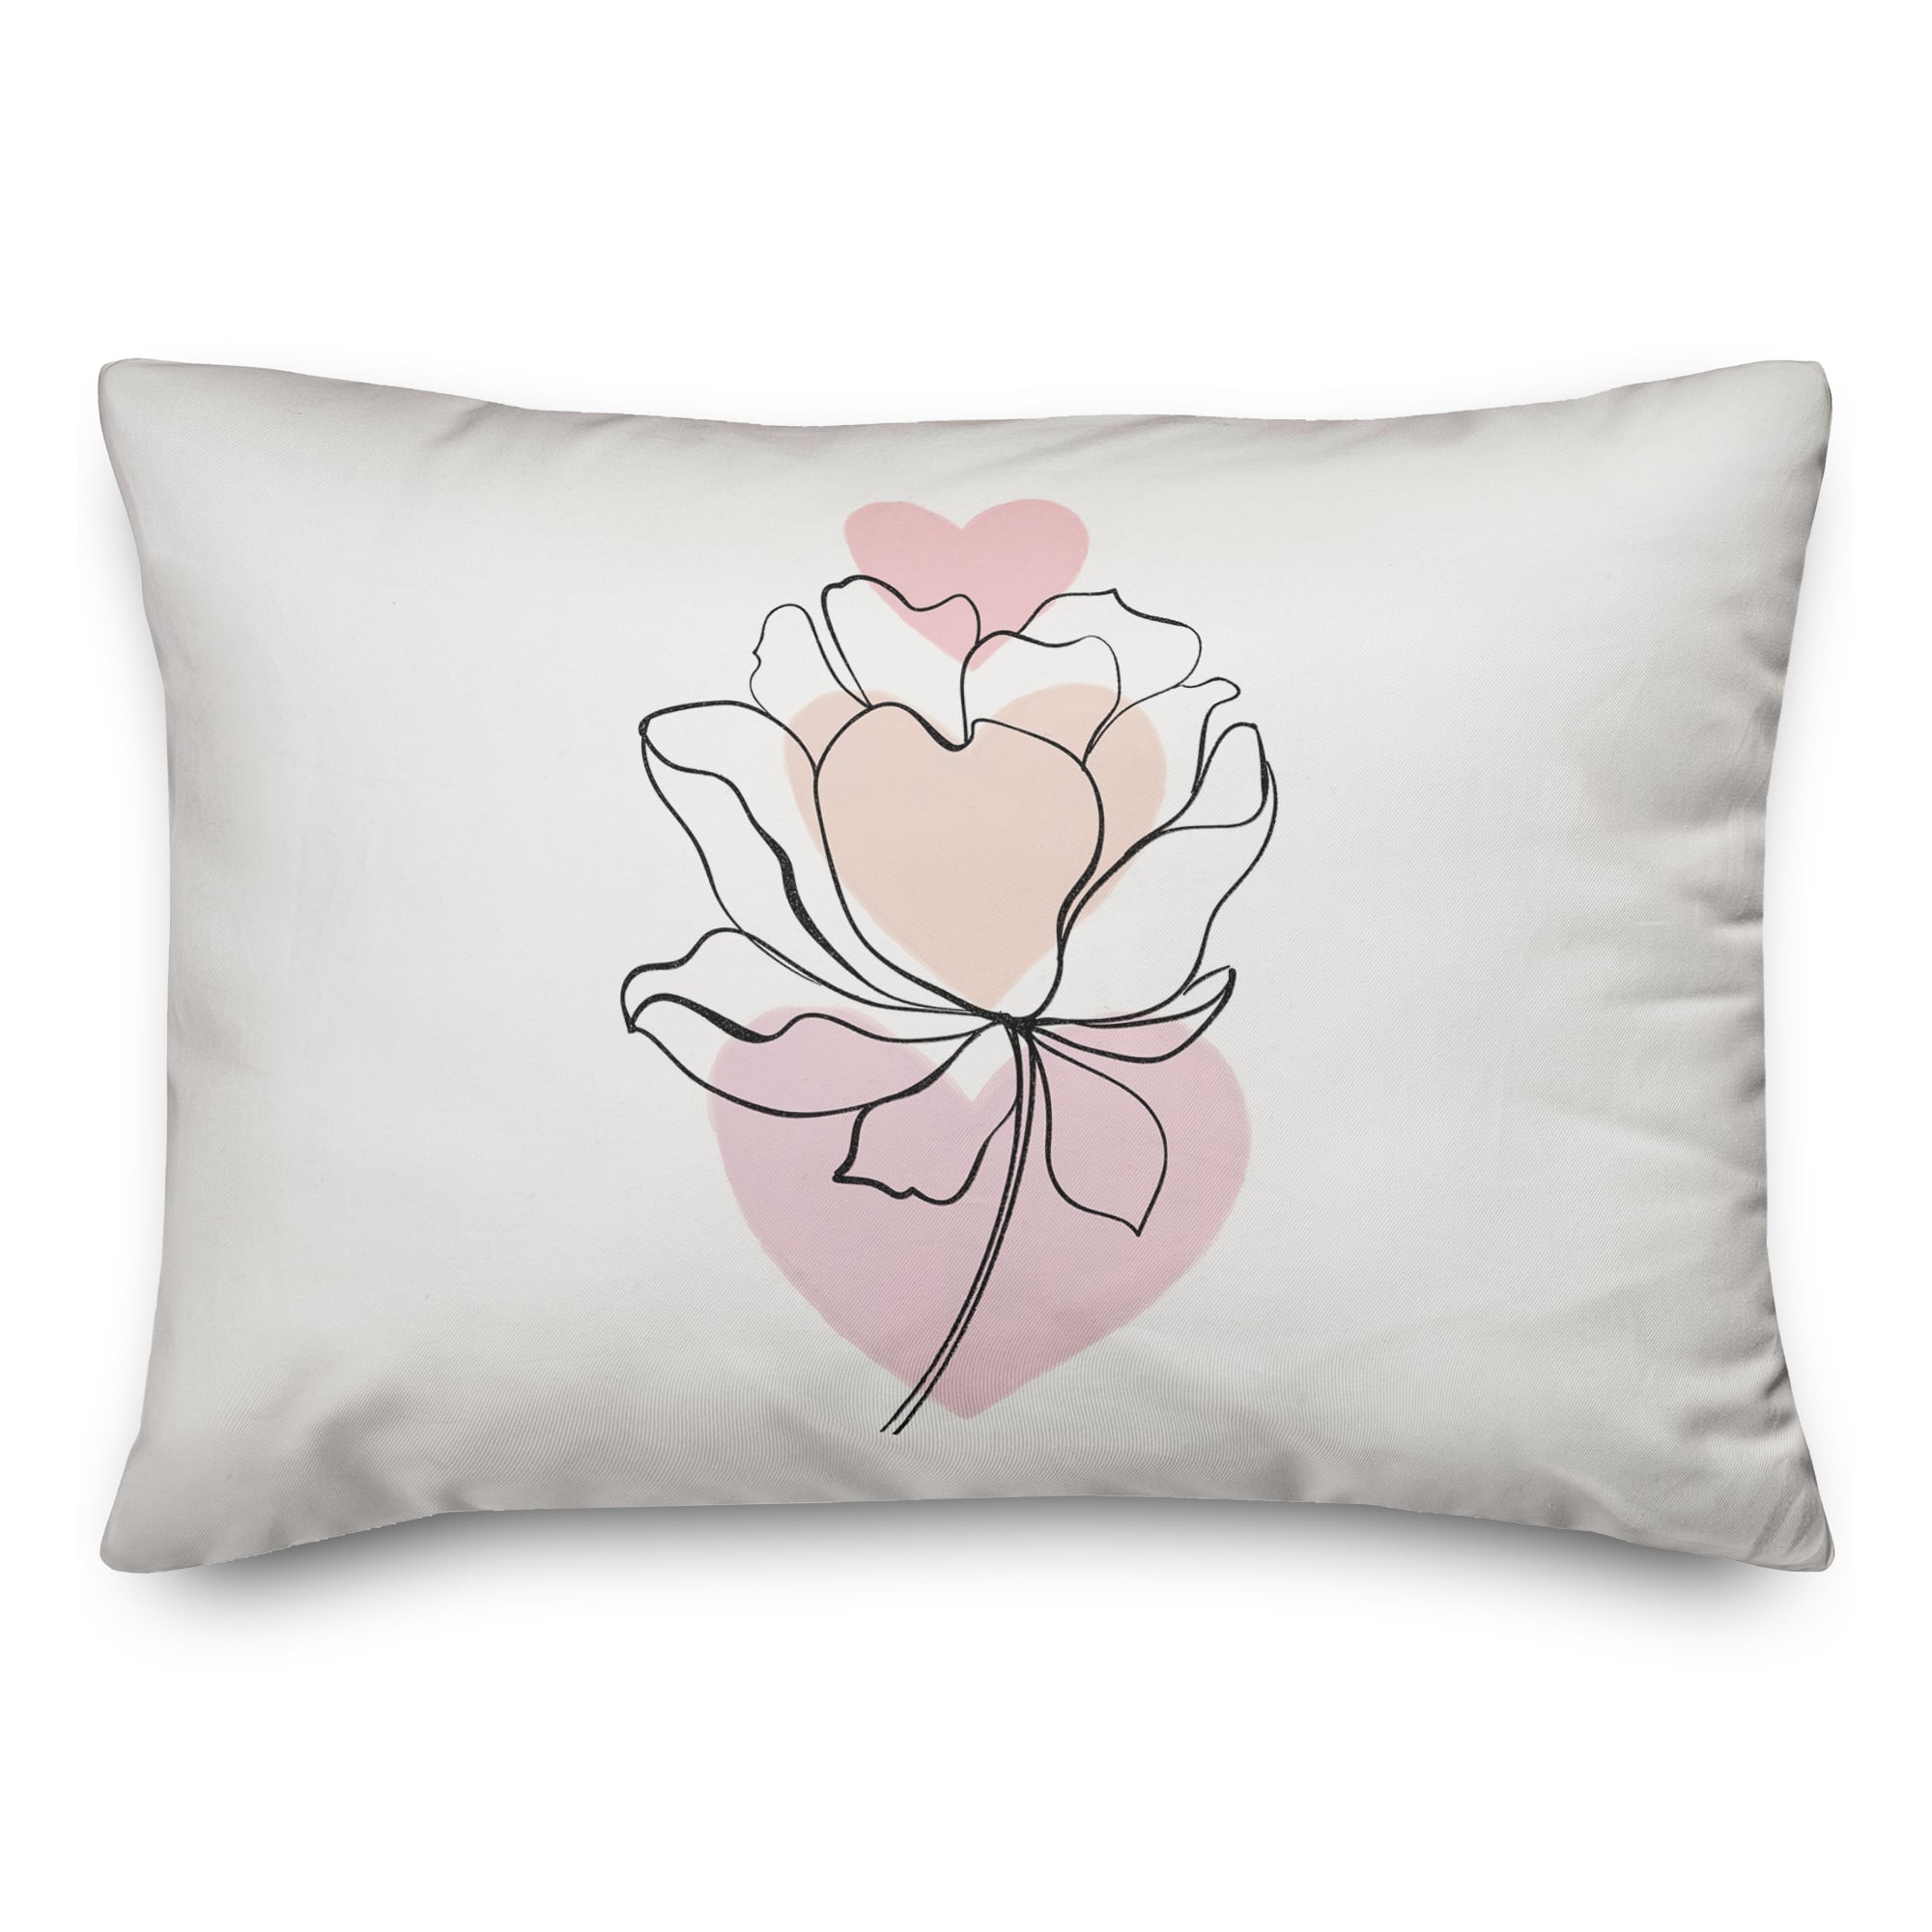 Flower Line Drawing Throw Pillow